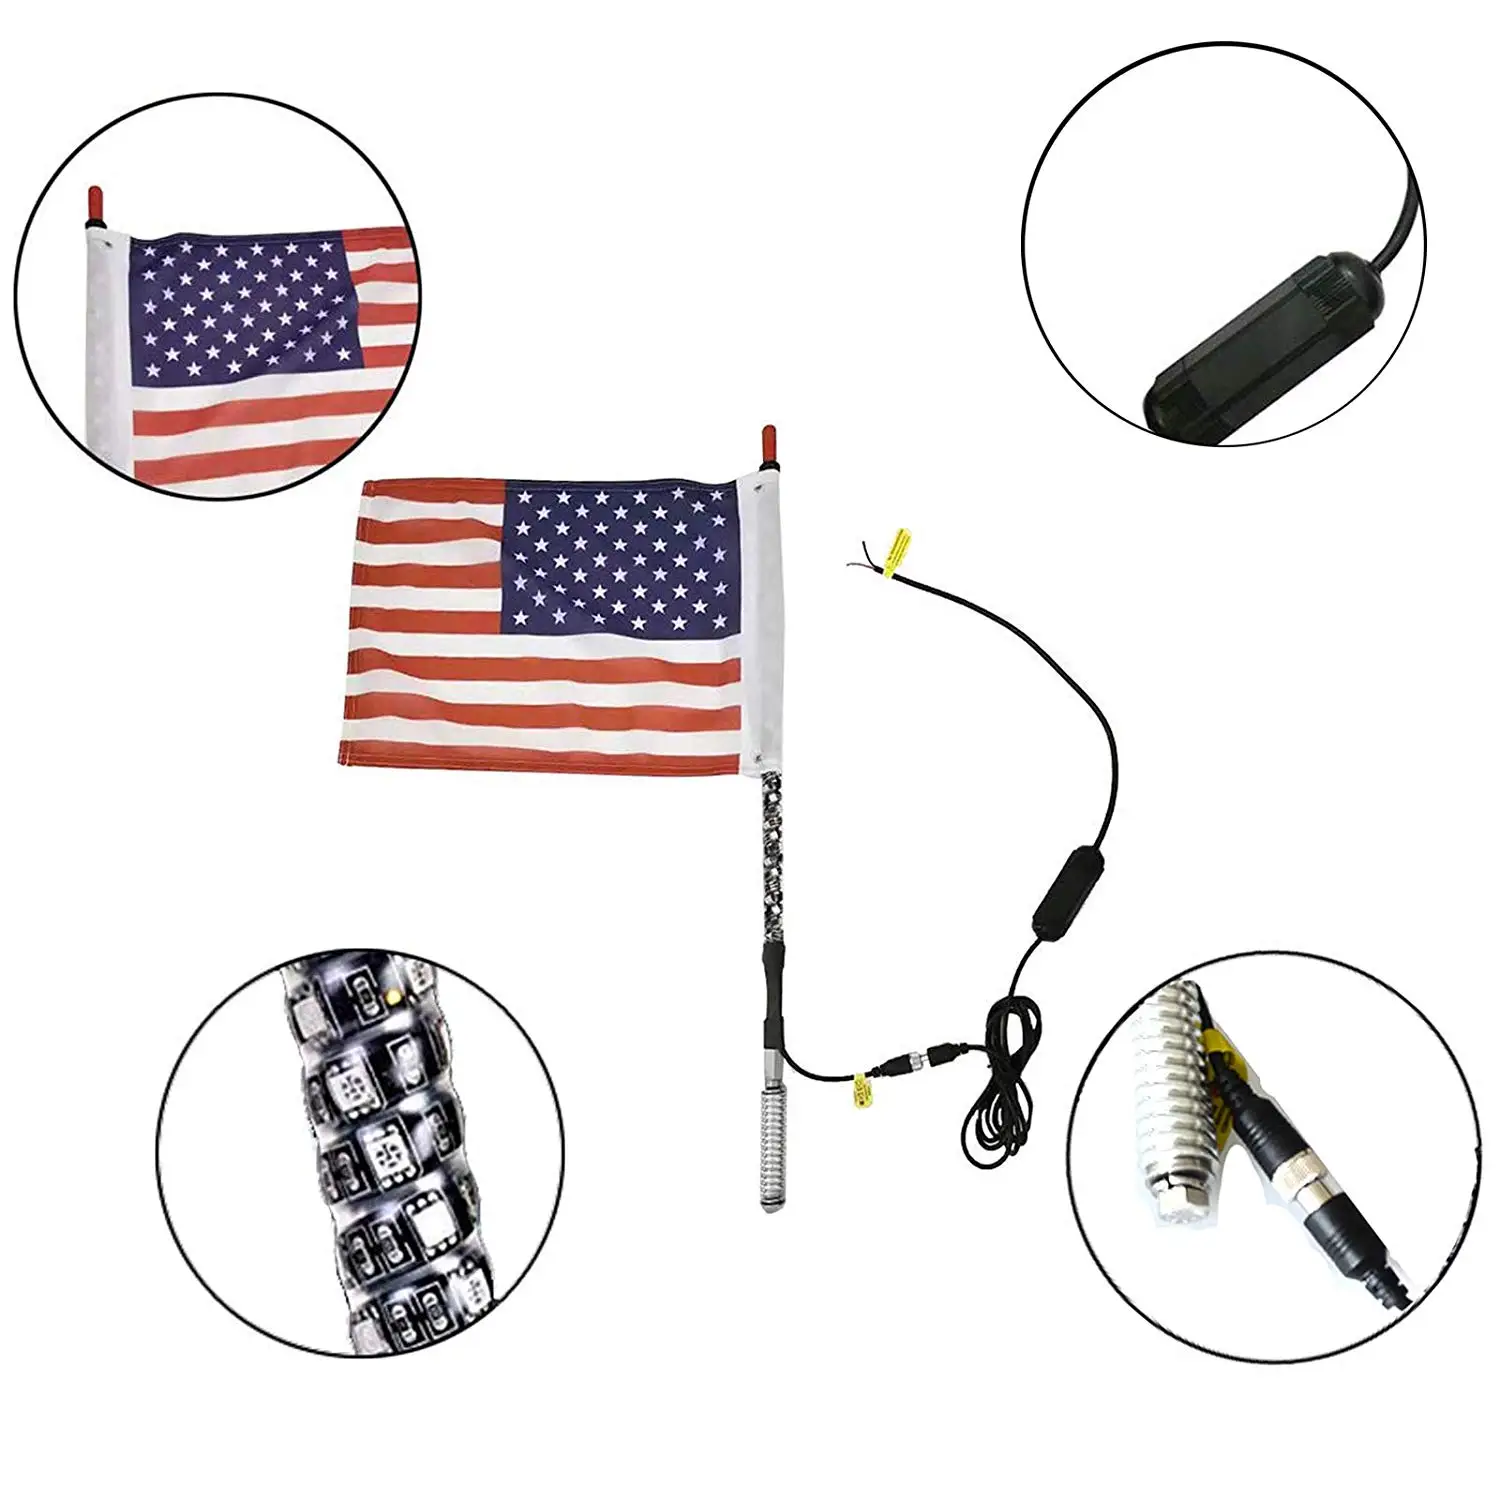 Pairs remote control safety mining buggy whip 3/4/5/6 feet led whip antennas flag light for atv utv buggy rzr offroad car